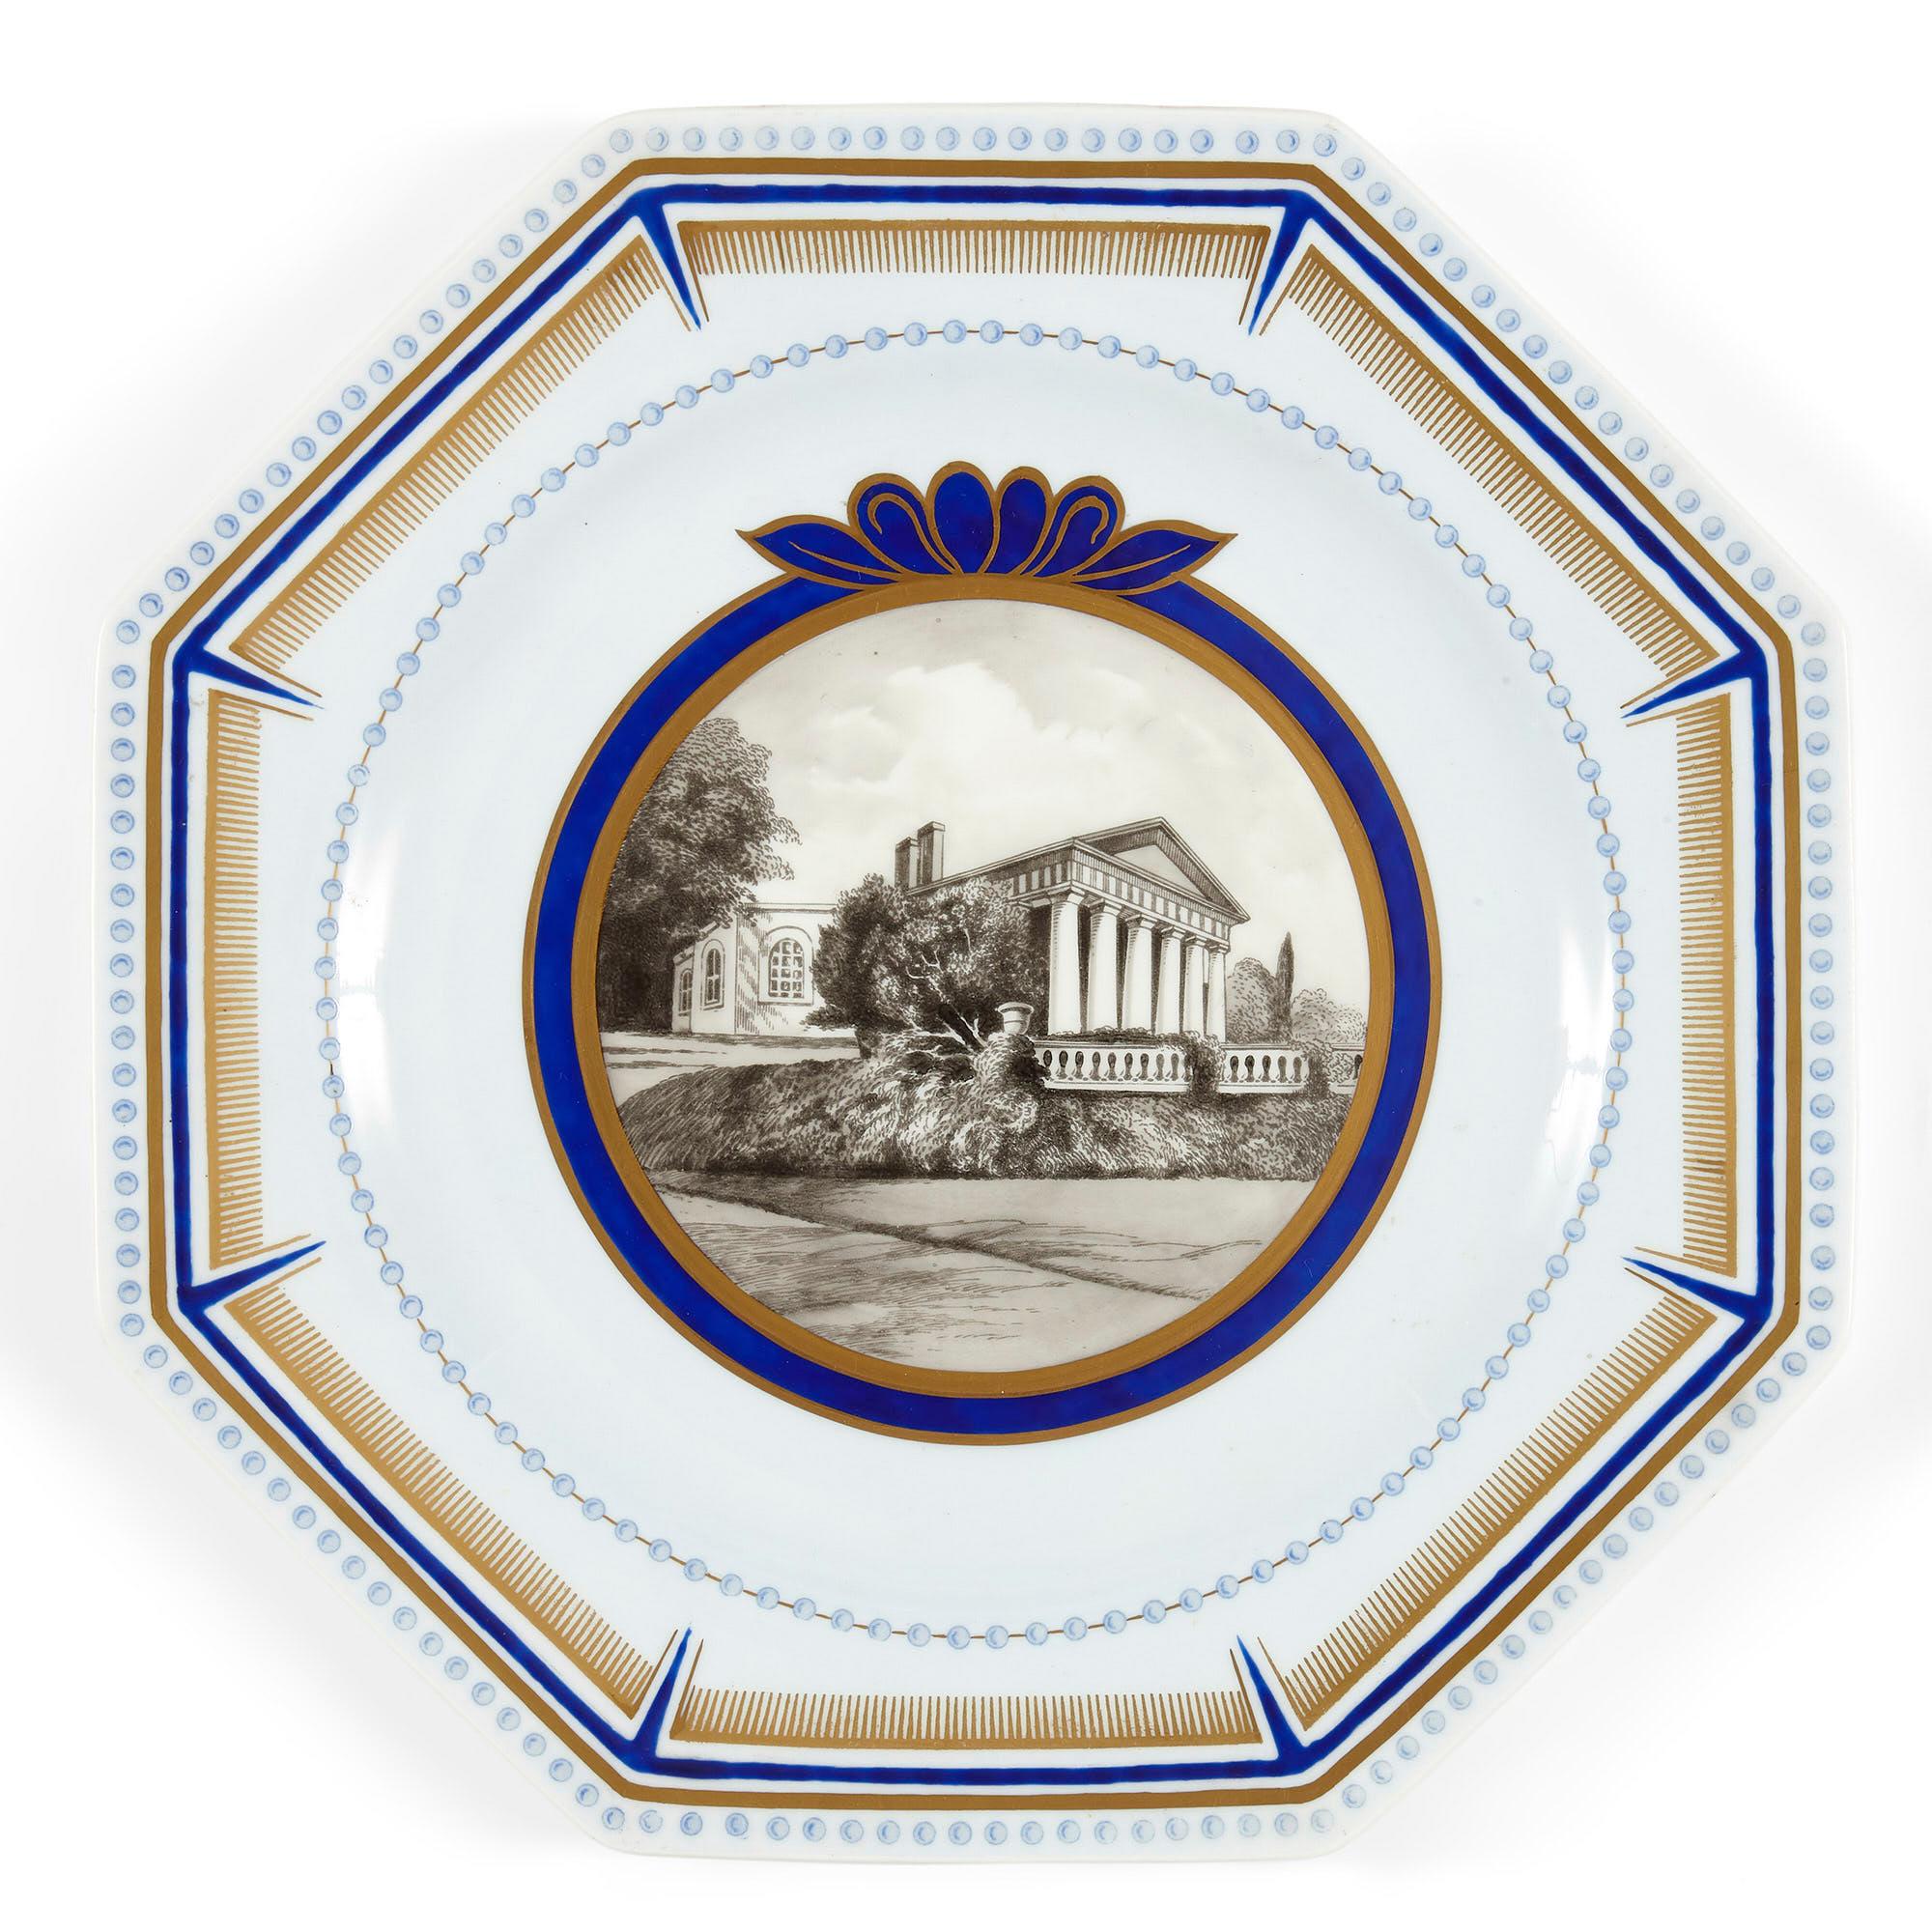 Set of ten octagonal porcelain plates of American interest by Wedgwood
English, 1927
Measures: Height 2cm, diameter 25.5cm.

The plates in this set, of octagonal form and of American interest, are fine examples of the Art Deco style. Each plate